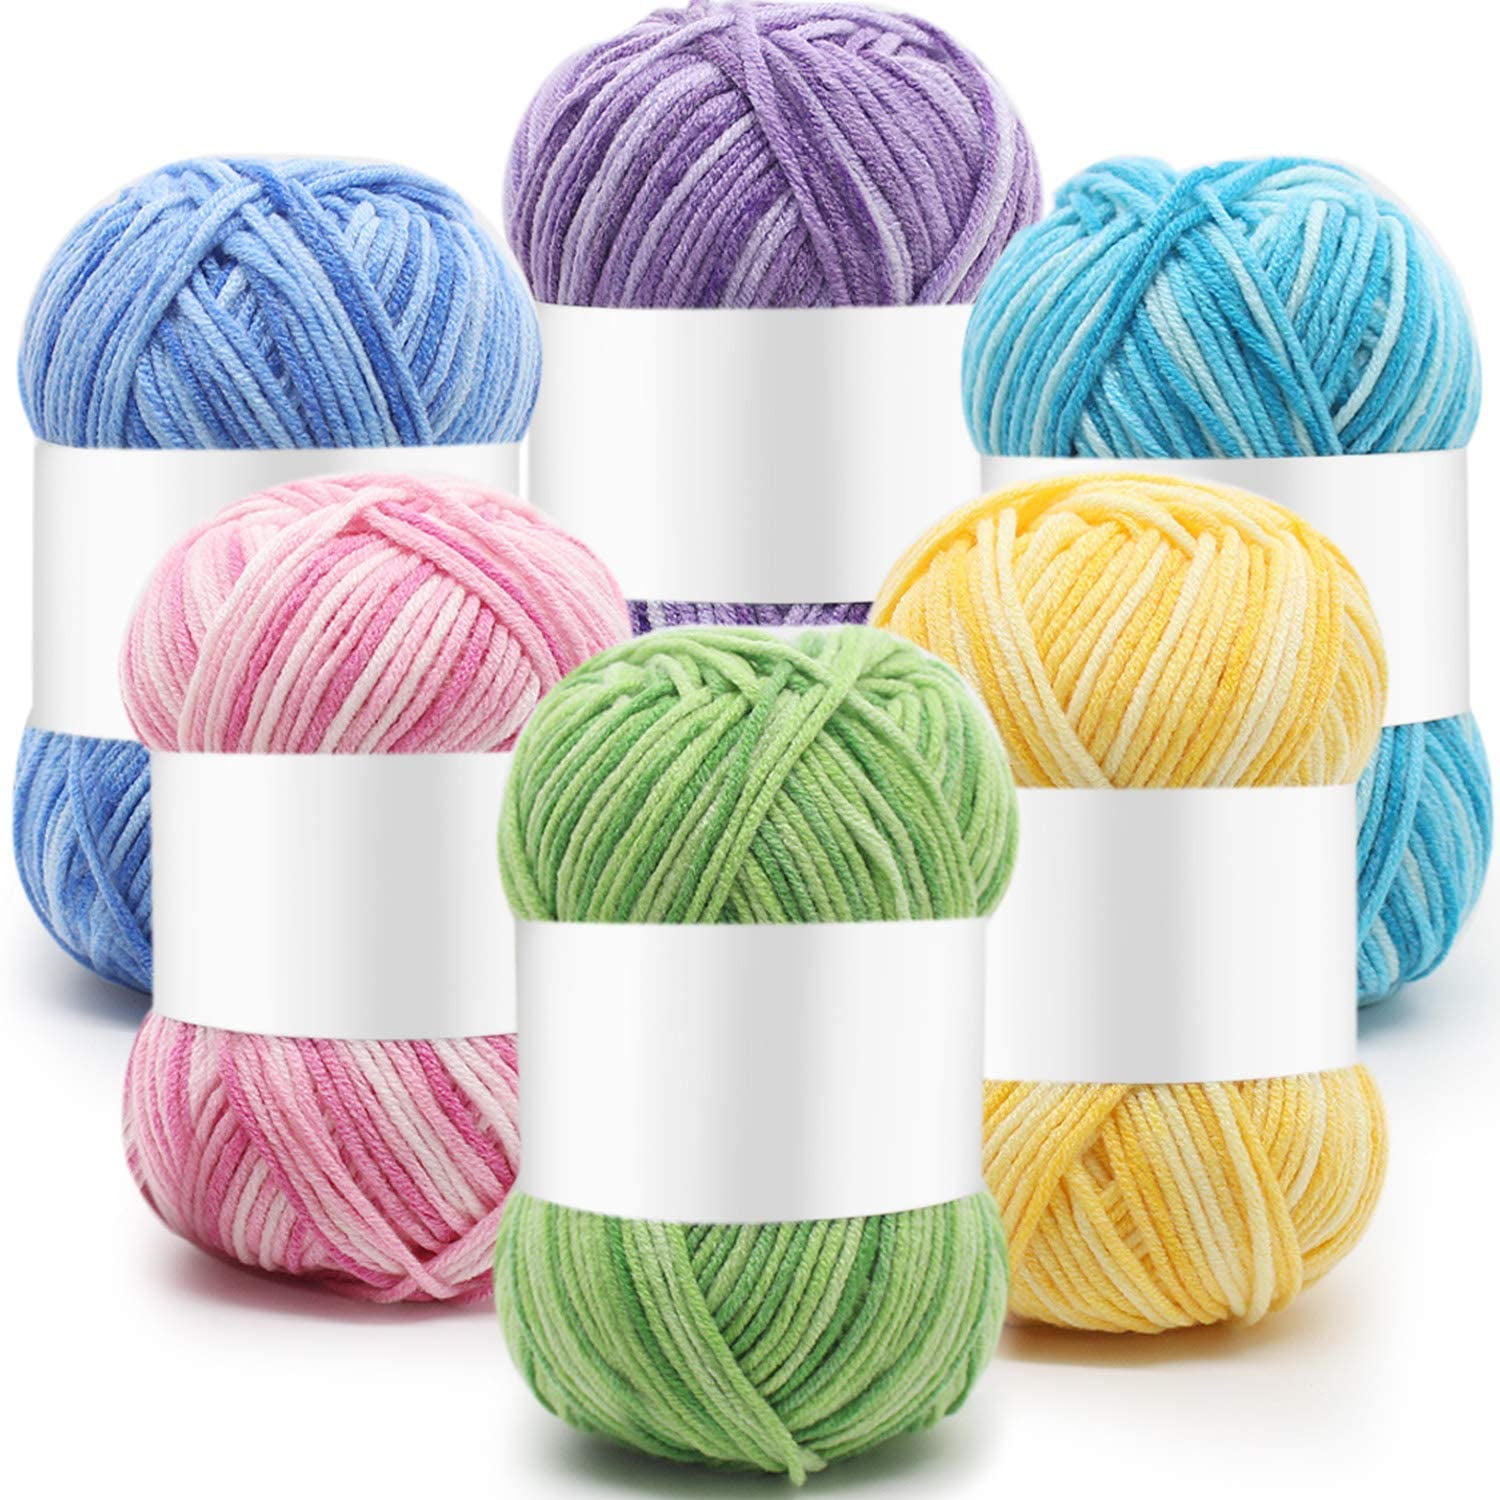 6 Pieces 50 g Crochet Yarn Multi-Colored Acrylic Knitting Yarn Hand  Knitting Yarn Weaving Yarn Crochet Thread (Blue Red, Purple Pink, Colors,  Peach, Dark Pink, Colorful Red)(D) 